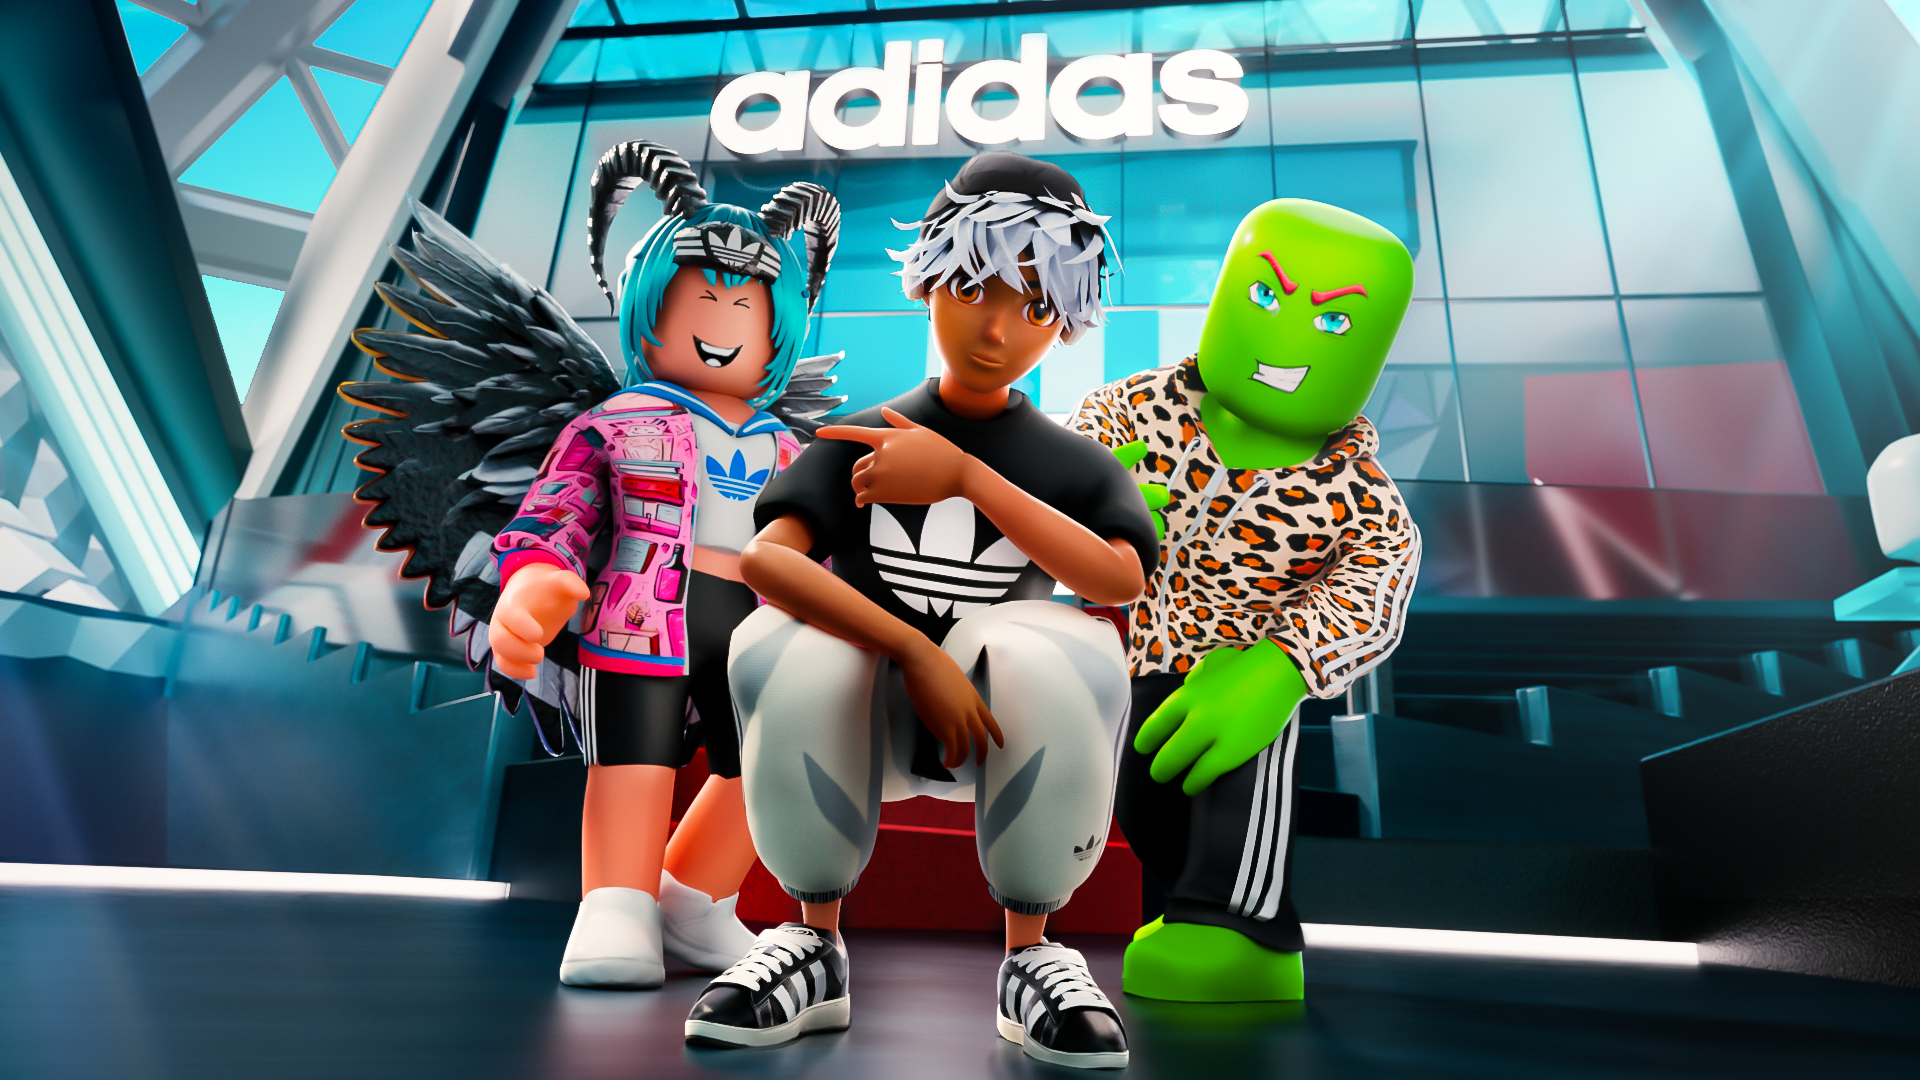 adidas is bringing its iconic sport and lifestyle brand to Roblox